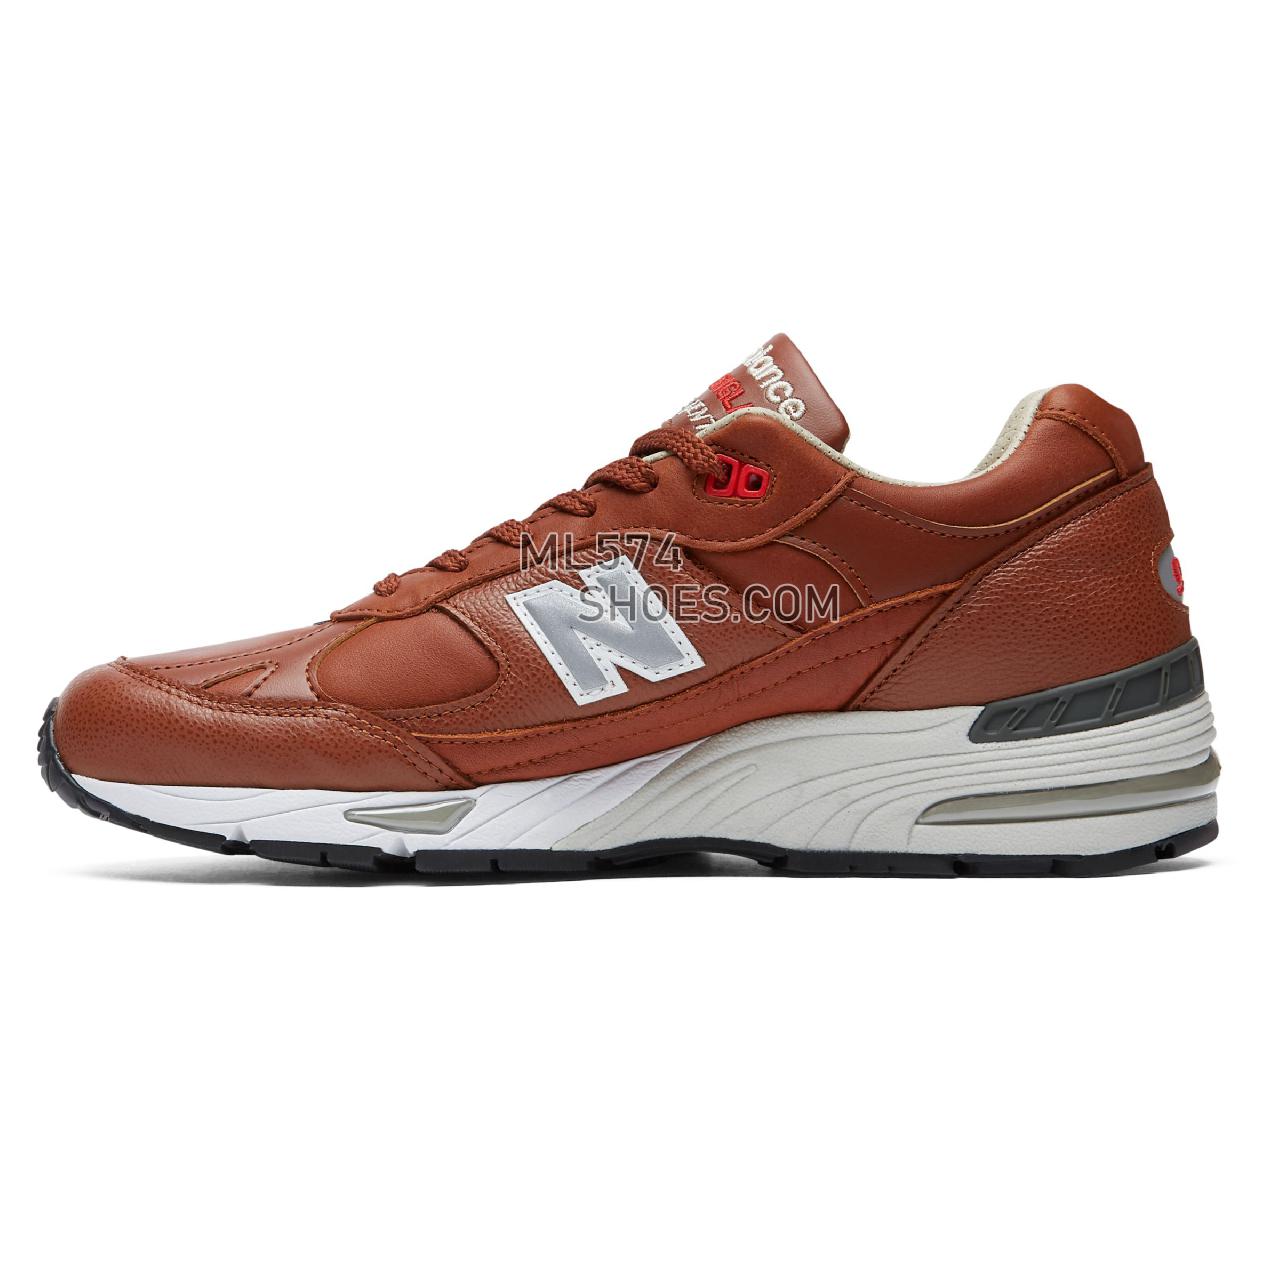 New Balance Made in UK 991 - Men's Made in UK 991 Classic ML991V1-27393-M - Burnt Orange with Silver and White - M991GNB